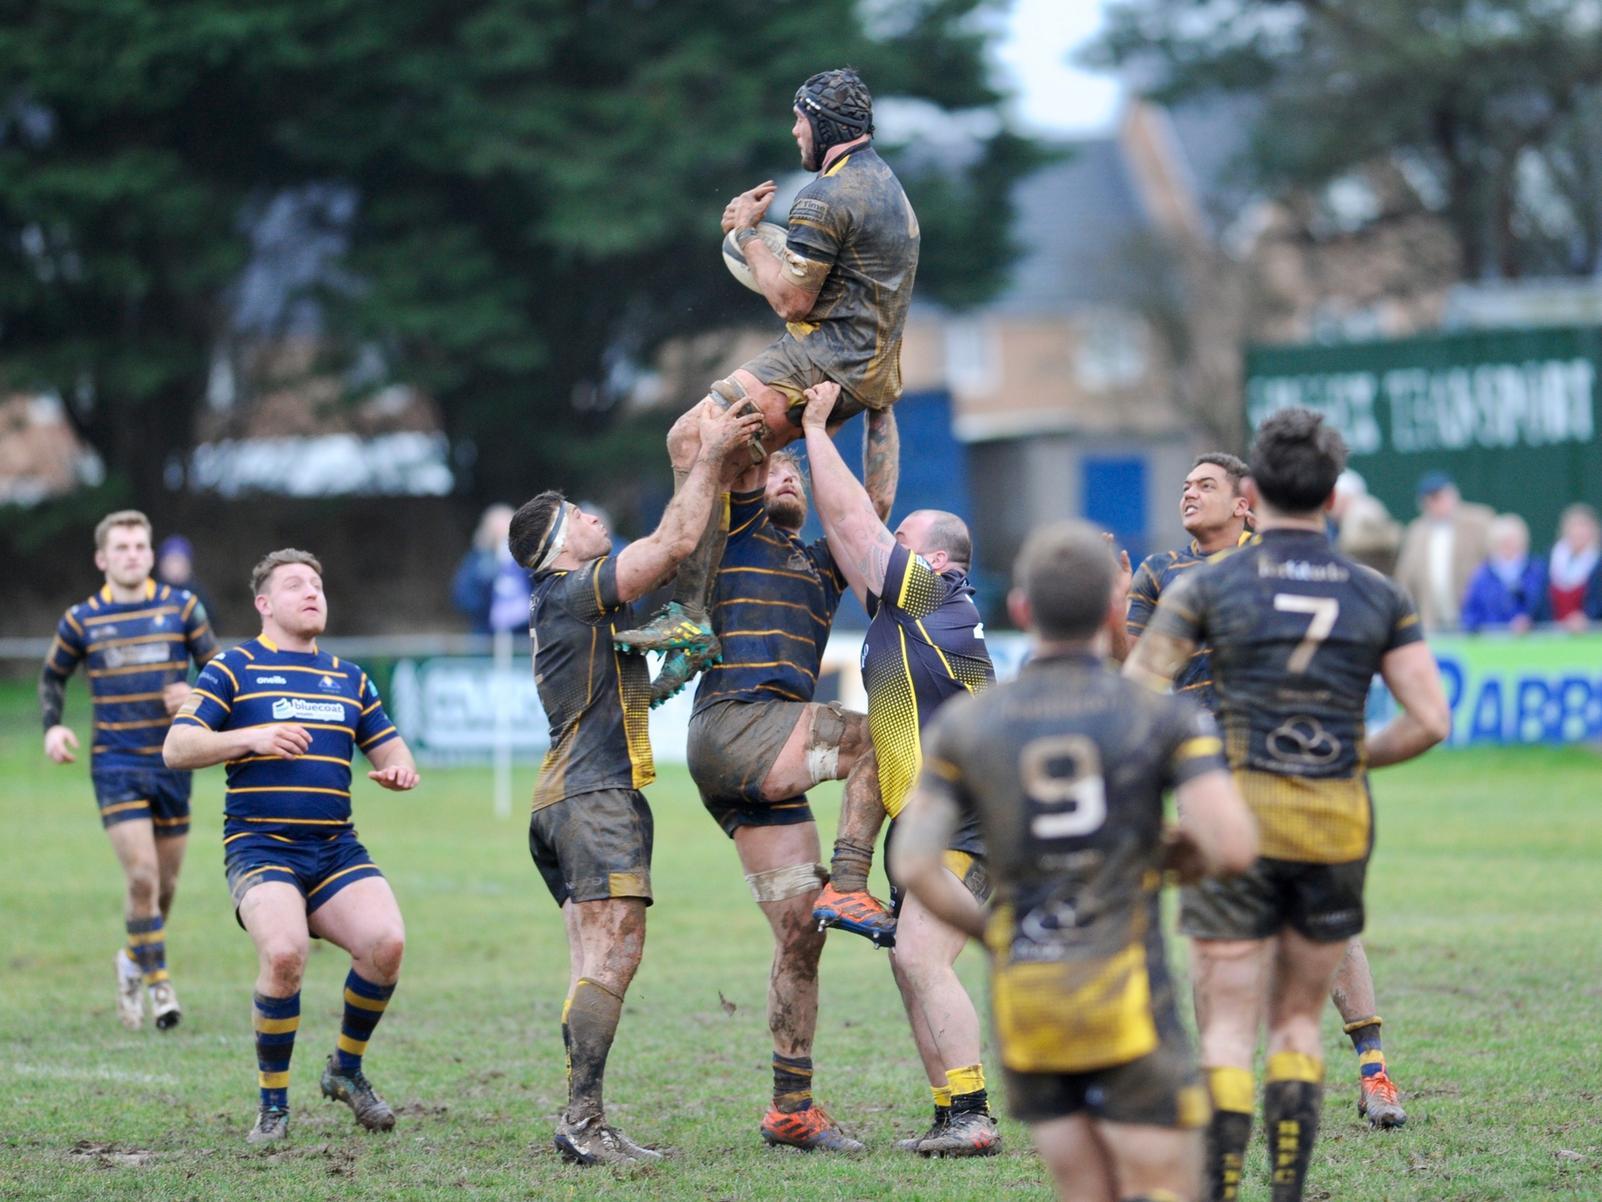 Action from Raiders' win over Bournemouth